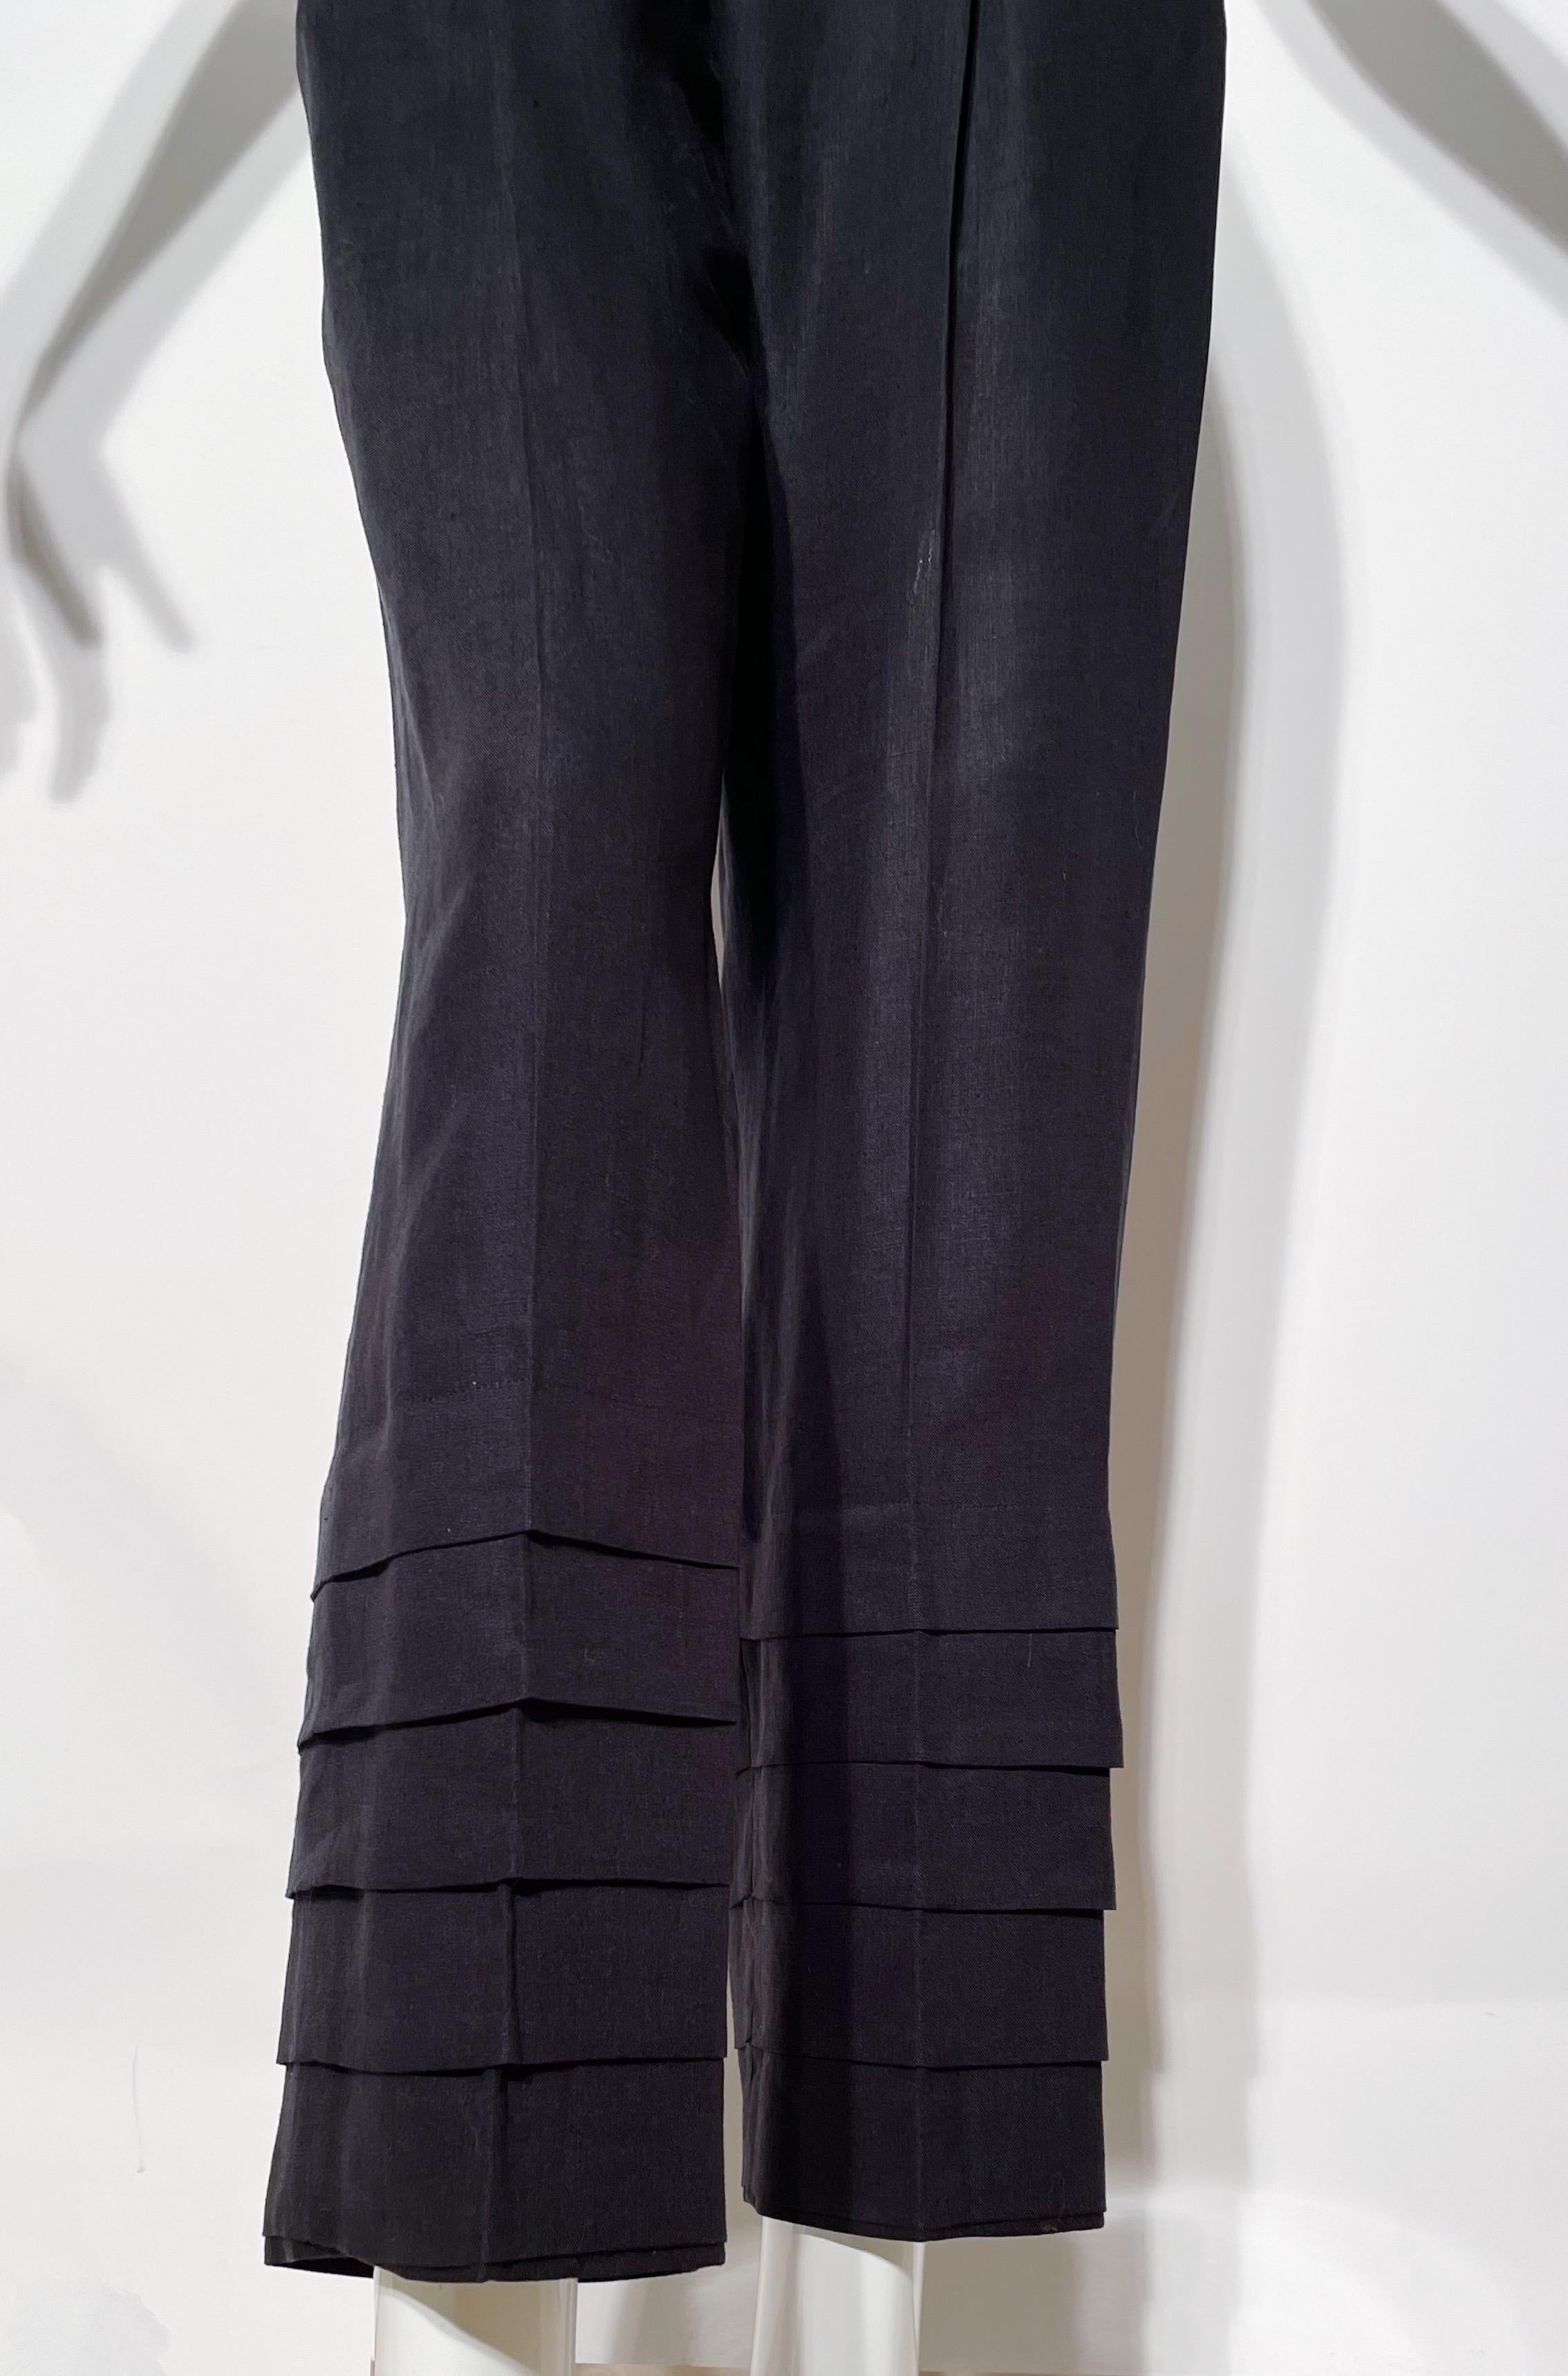 Black linen trousers. Pleated. Front pockets. Button closure. Ruffle detailing at ankle. Made in Italy.
*Condition: excellent vintage condition. No visible flaws.

Measurements Taken Laying Flat (inches)—
Waist: 25 in.
Hip: 34 in.
Rise: 11